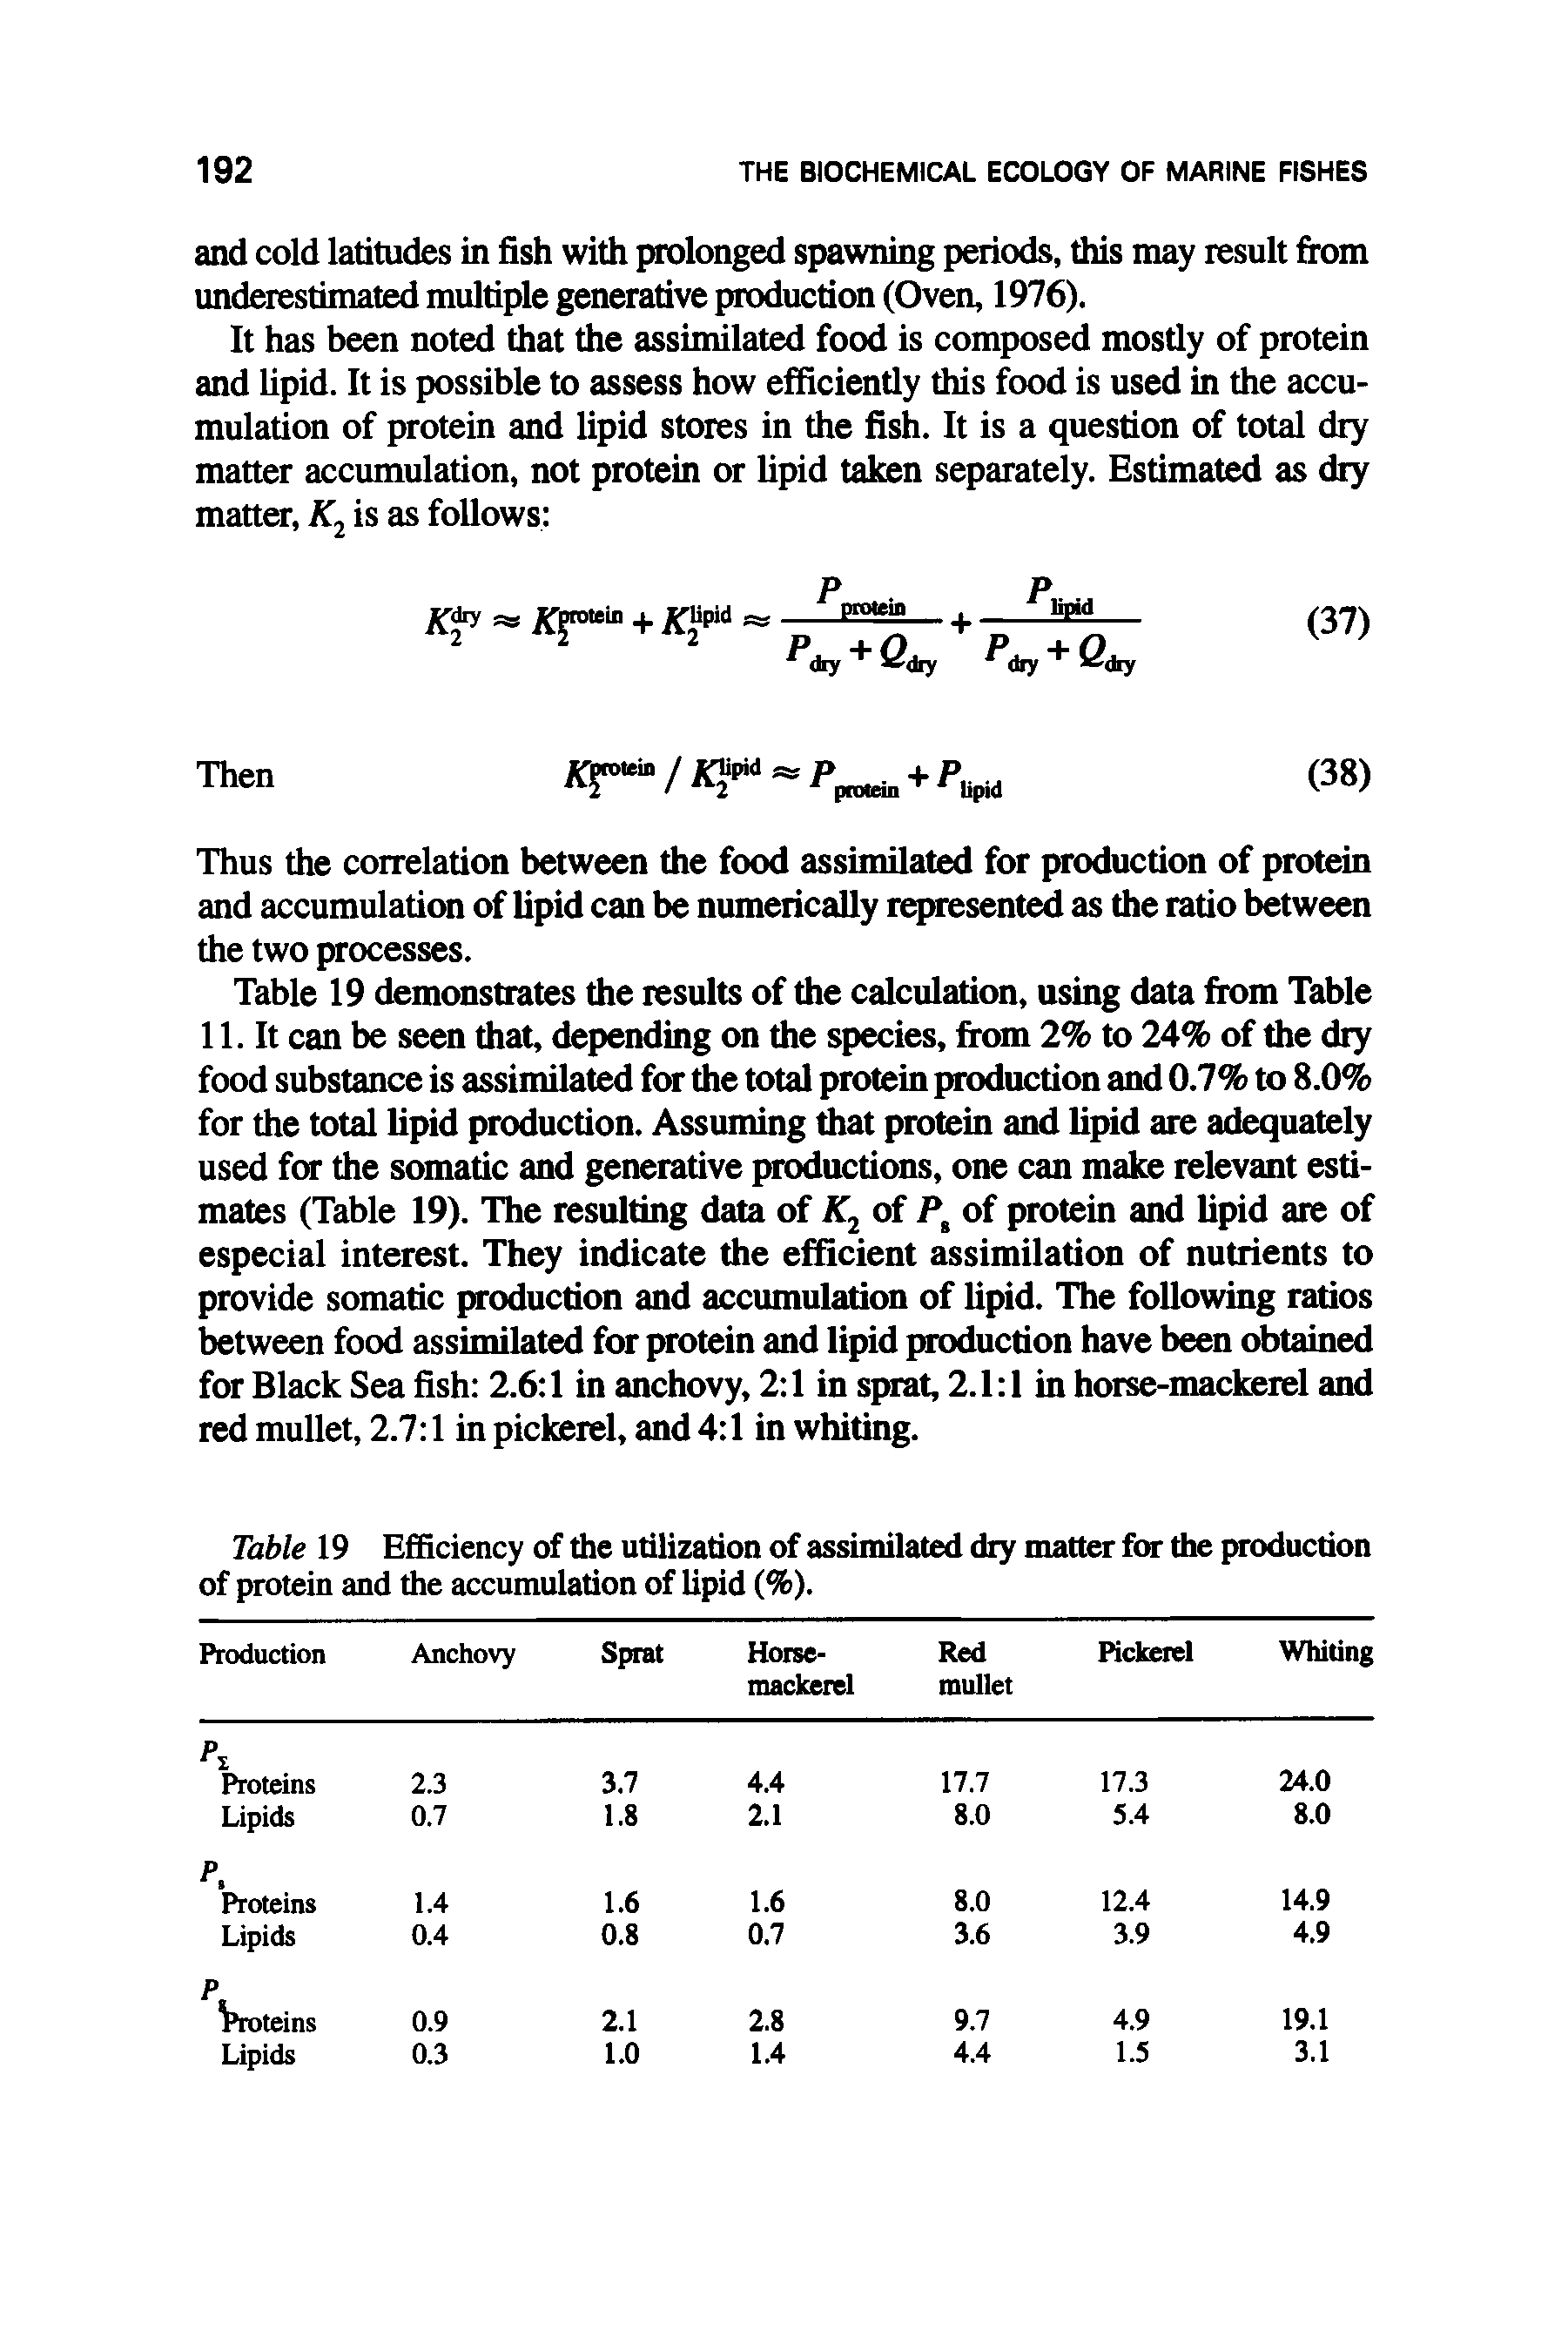 Table 19 demonstrates the results of the calculation, using data from Table 11. It can be seen that, depending on the species, from 2% to 24% of the dry food substance is assimilated for the total protein production and 0.7% to 8.0% for the total lipid production. Assuming that protein and lipid are adequately used for the somatic and generative productions, one can make relevant estimates (Table 19). The resulting data of K2 of P of protein and lipid are of especial interest. They indicate the efficient assimilation of nutrients to provide somatic production and accumulation of lipid. The following ratios between food assimilated for protein and lipid production have been obtained for Black Sea fish 2.6 1 in anchovy, 2 1 in sprat, 2.1 1 in horse-mackerel and red mullet, 2.7 1 in pickerel, and 4 1 in whiting.